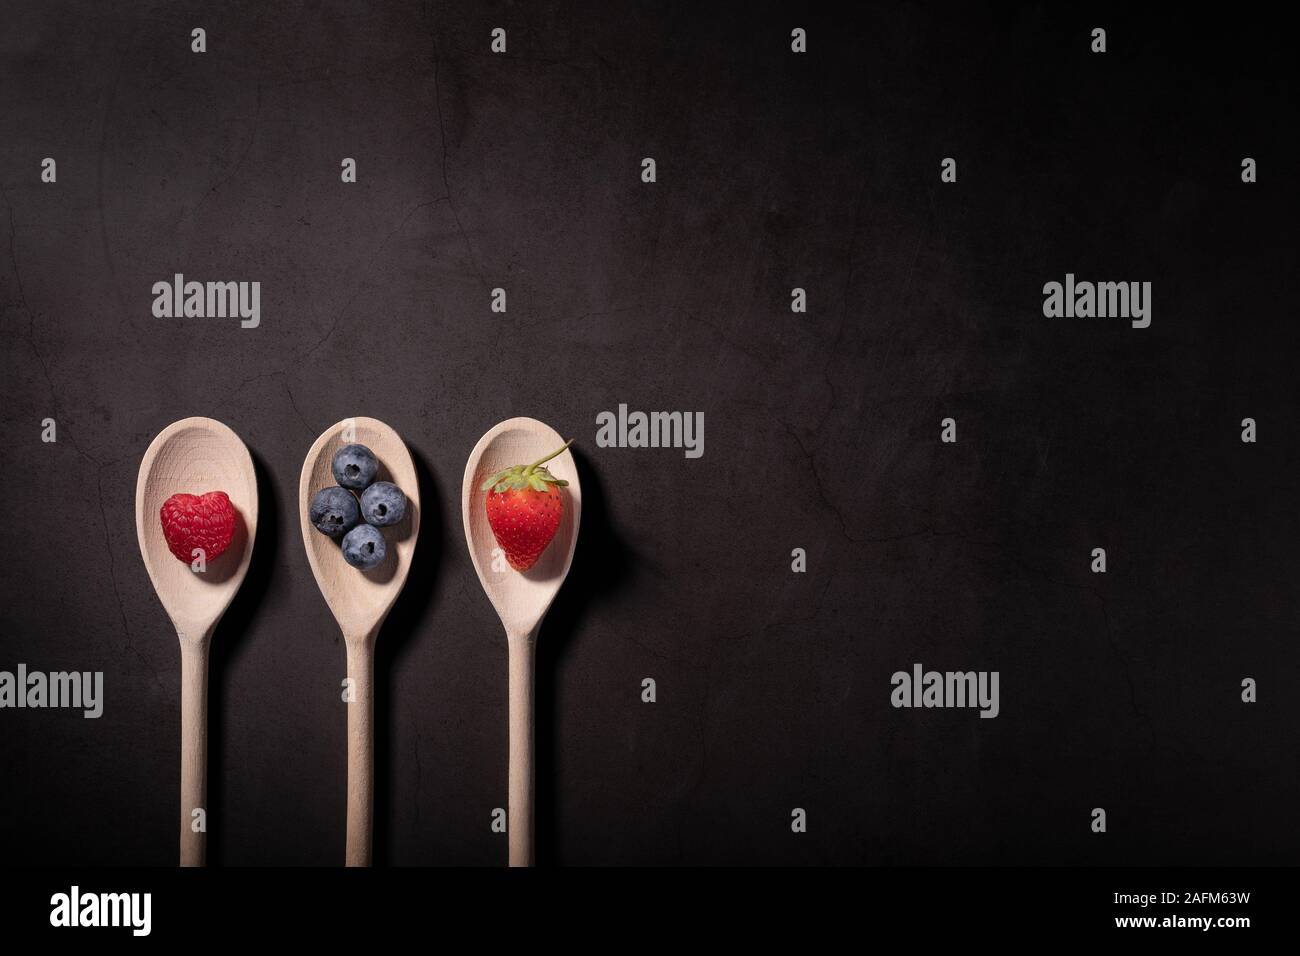 Raspberry, Blueberries and a Strawberry on wooden spoons photographed on a dark background with copy space. Stock Photo